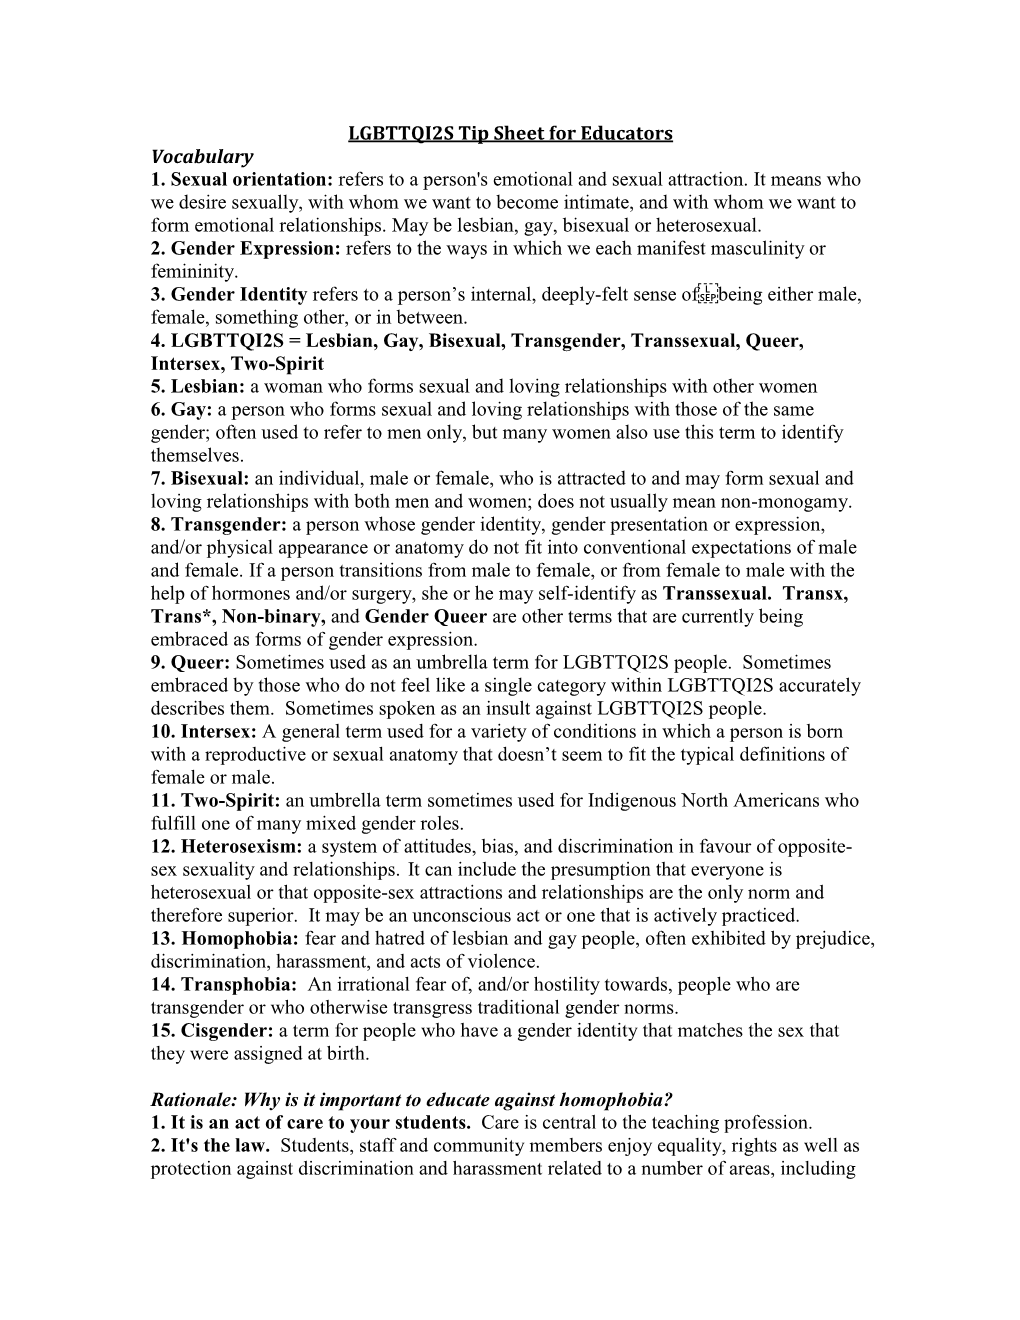 LGBTTQI2S Tip Sheet for Educators Vocabulary 1